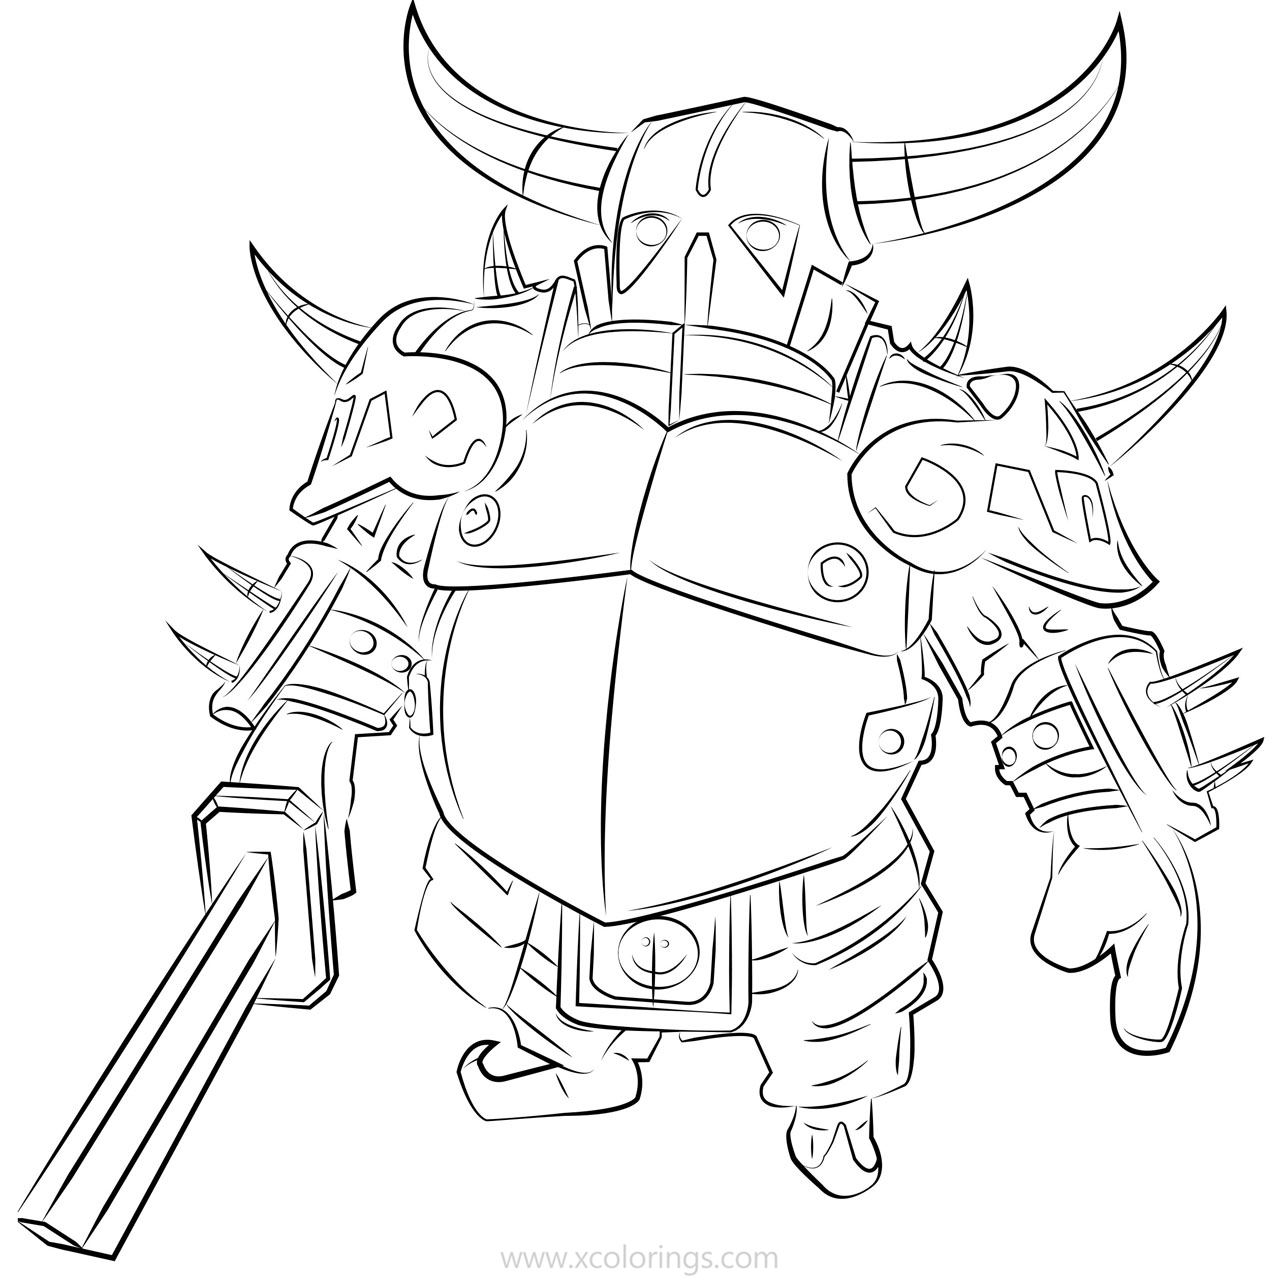 Free Clash Royale Coloring Pages Pekka Knight printable